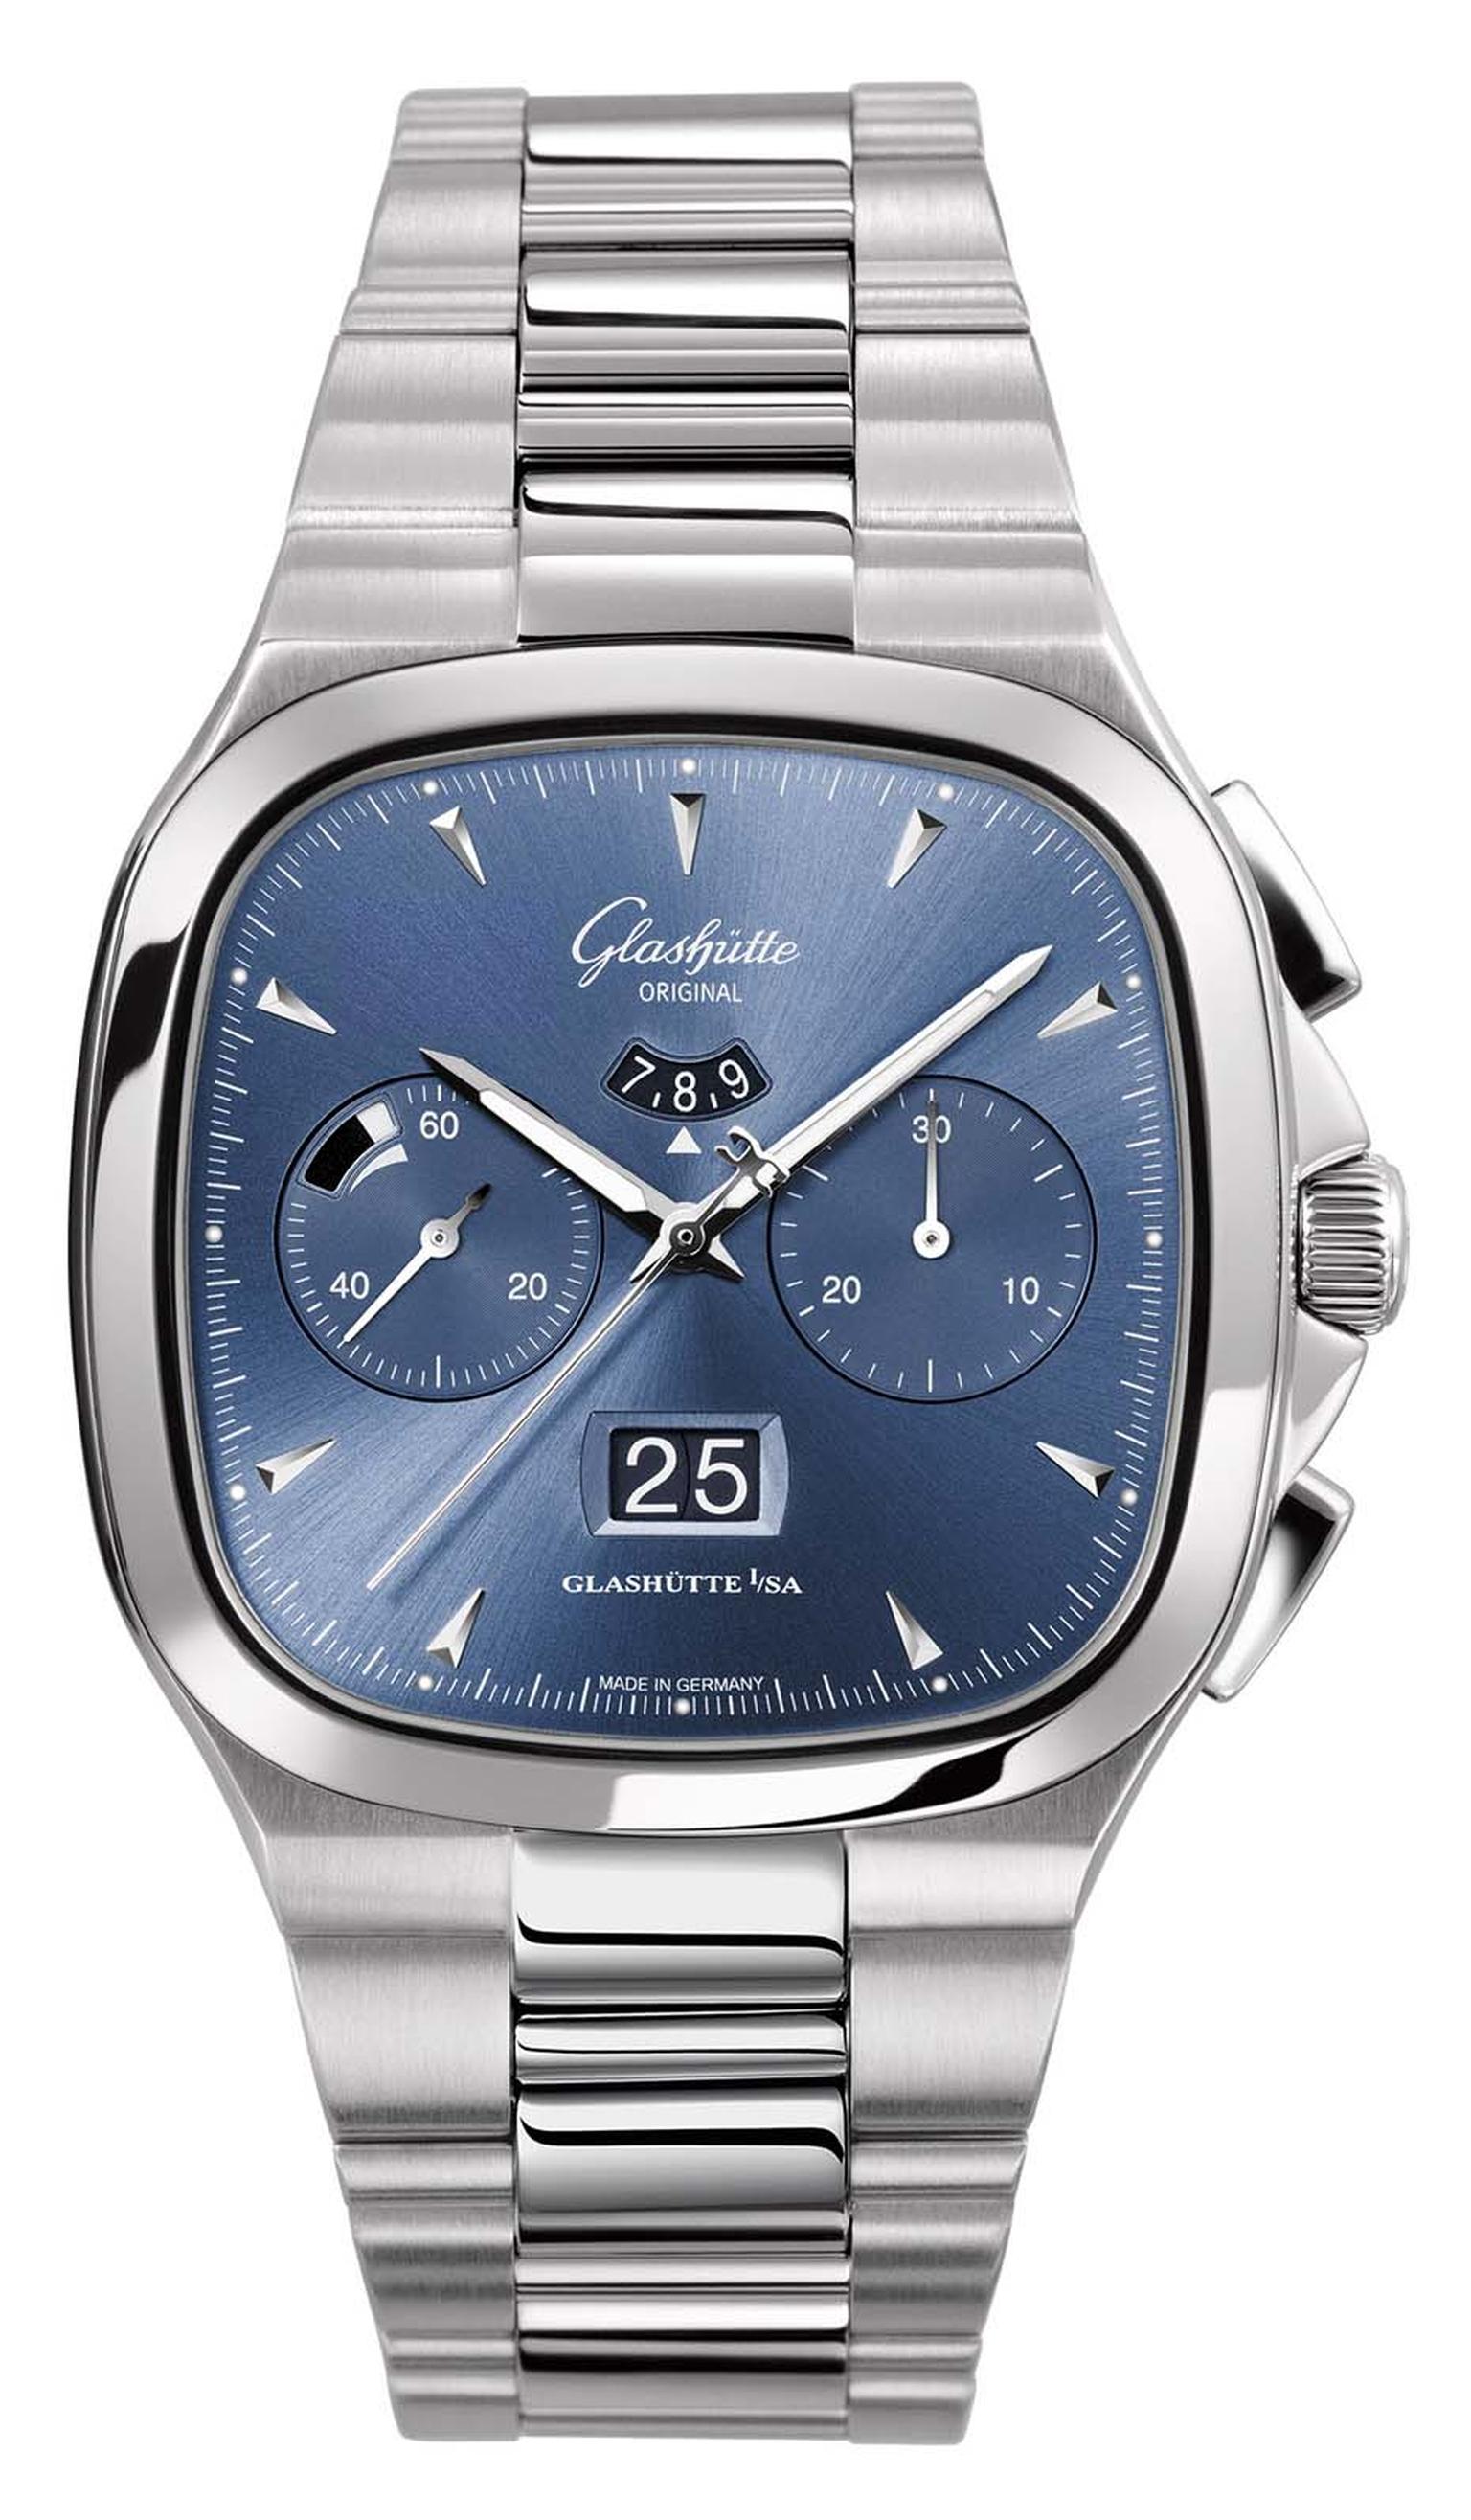 Available in galvanised ruthenium, silver and blue, the slinky sunburst finished surfaces and laidback dial on the Glashütte Original Seventies Chronograph Panorama Date watch are very cool